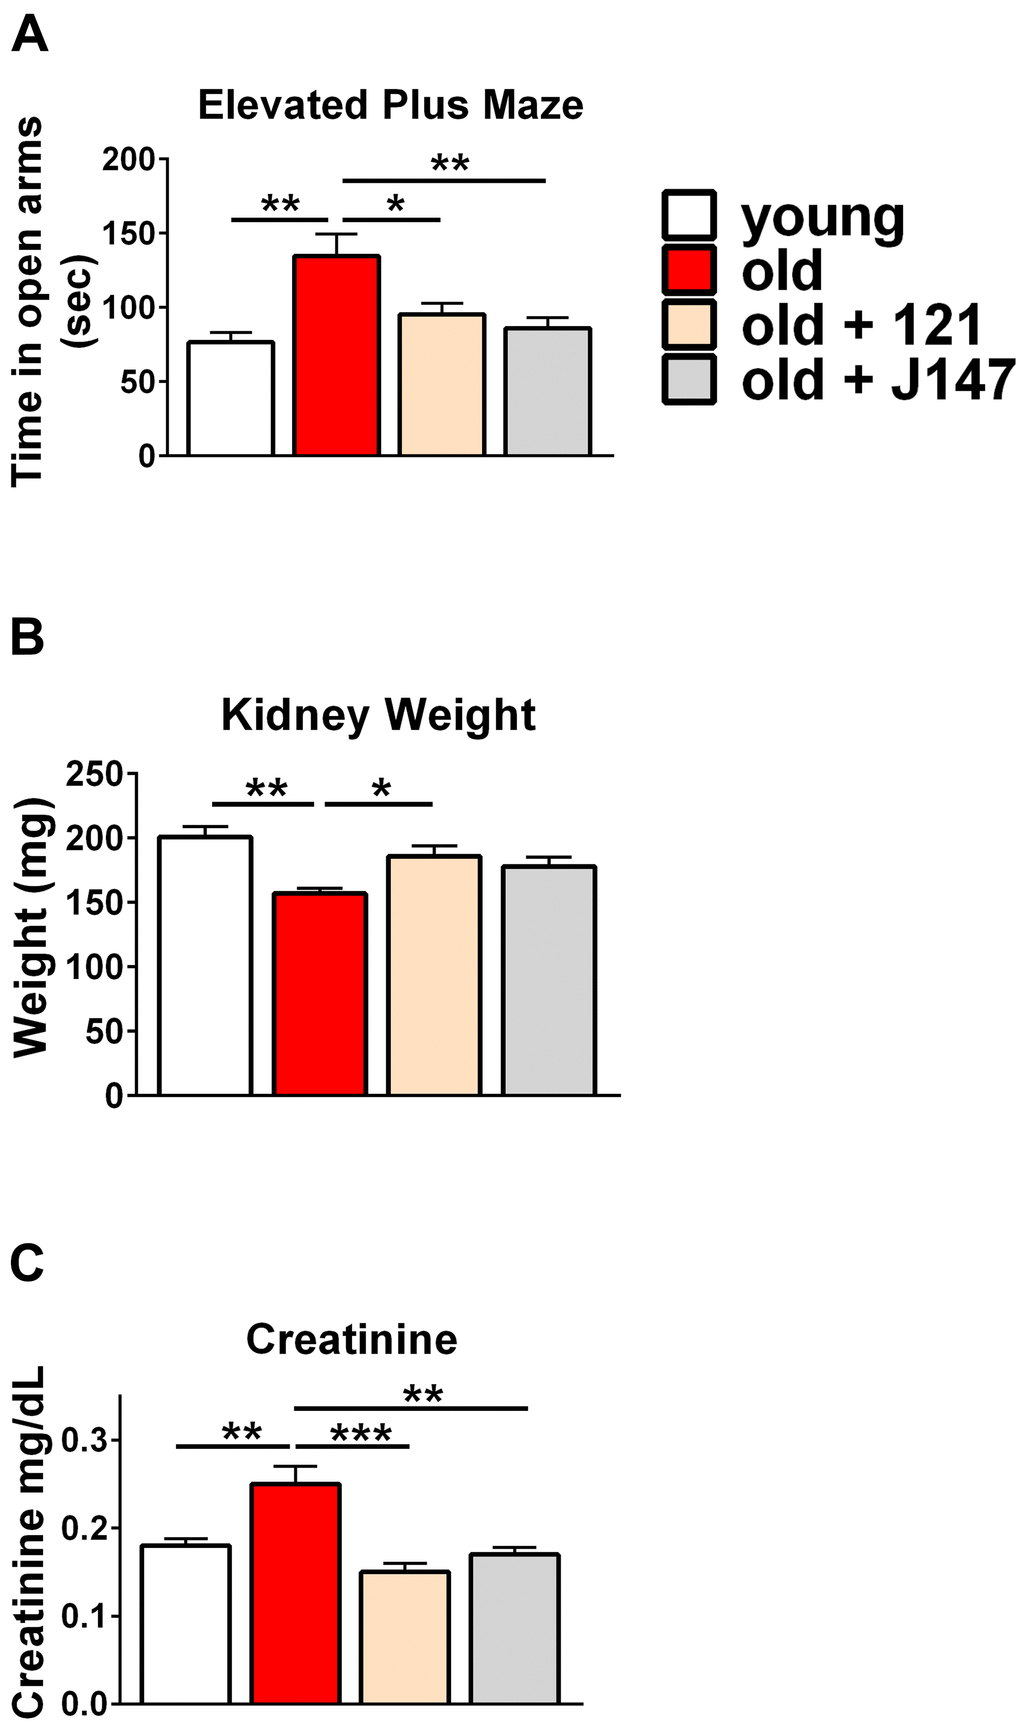 J147 and CMS121 improve markers for brain and kidney health in old SAMP8 mice. (A) Bar graph of time spent in the open arms of the elevated plus maze (n= 11-18/group). The data in panel 1A is redrawn from Currais et al. [26]. (B) Bar graph of measured kidney weights (n = 6/group). (C) Bar graph of measured plasma creatinine levels (n = 6/group). Data are presented as mean ± SEM. Results were compared by one-way ANOVA, followed by Turkey’s multiple comparison test.